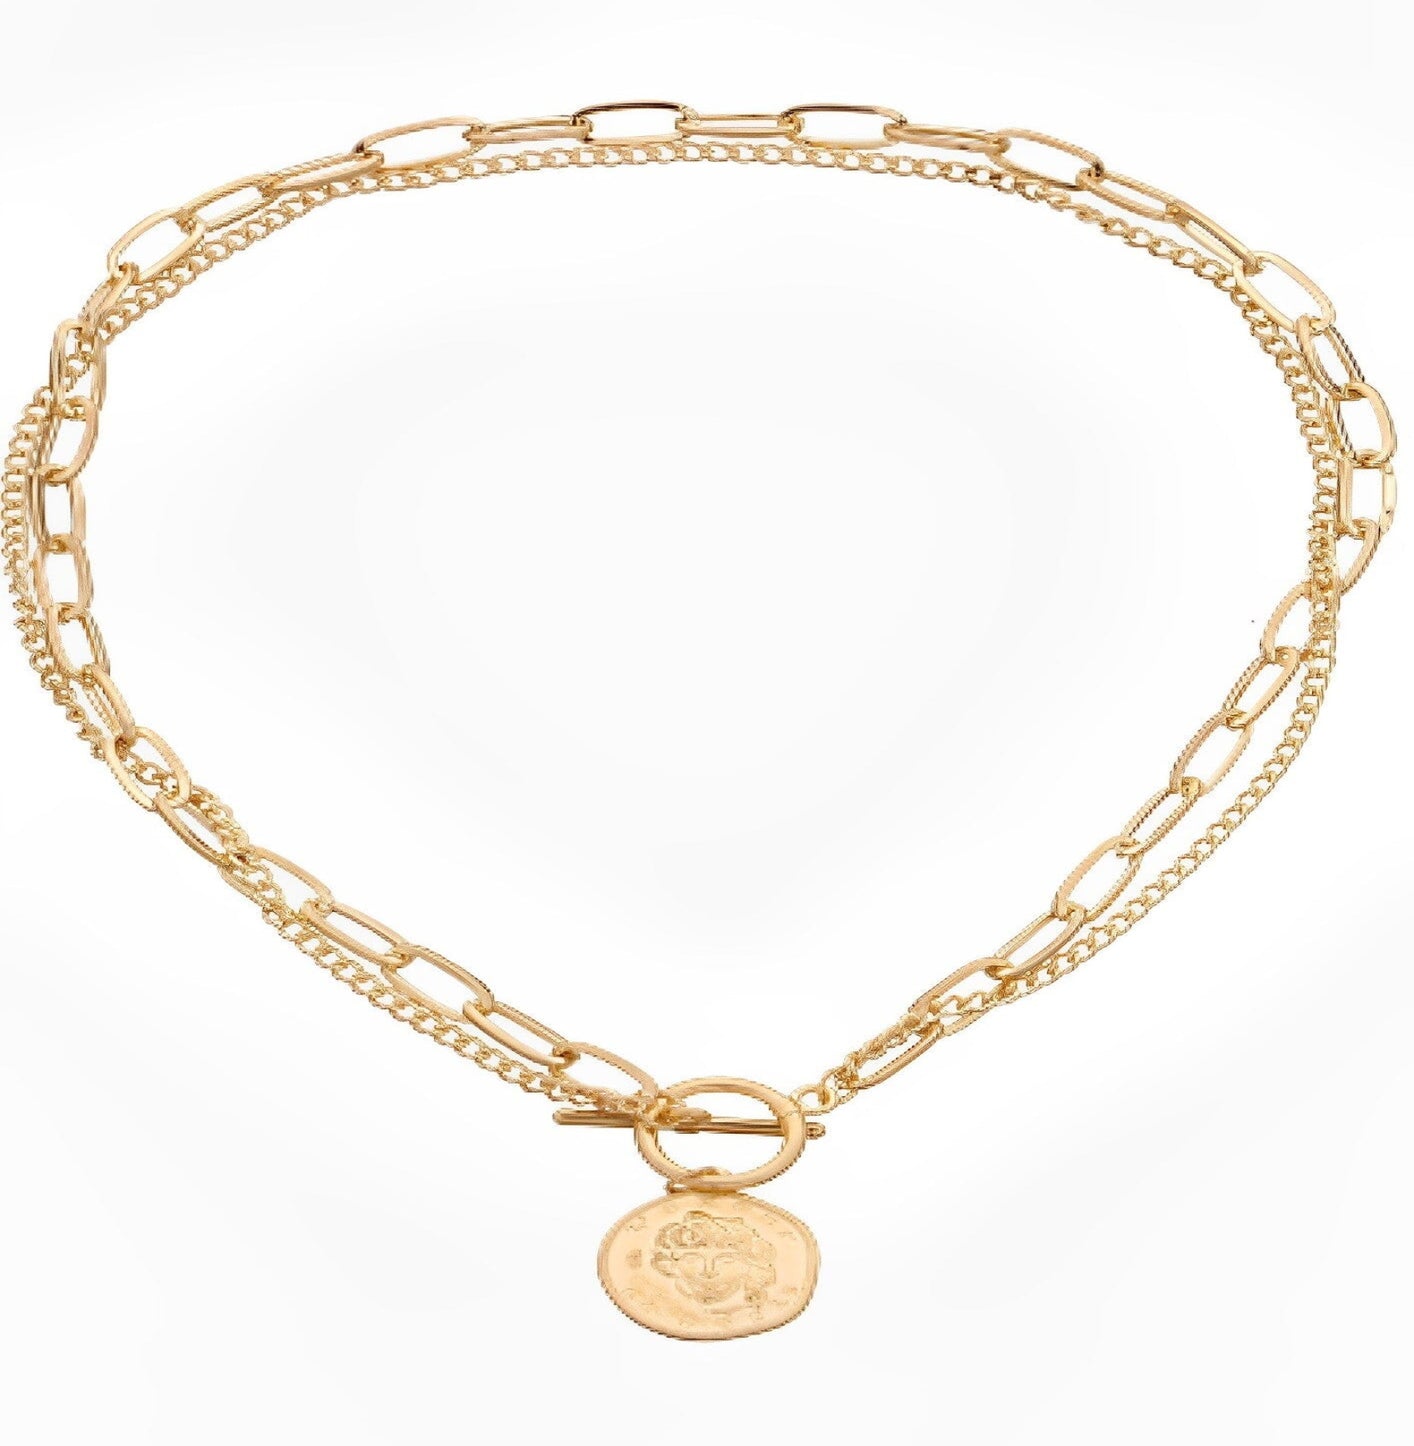 THYRA NECKLACE neck Yubama Jewelry Online Store - The Elegant Designs of Gold and Silver ! 